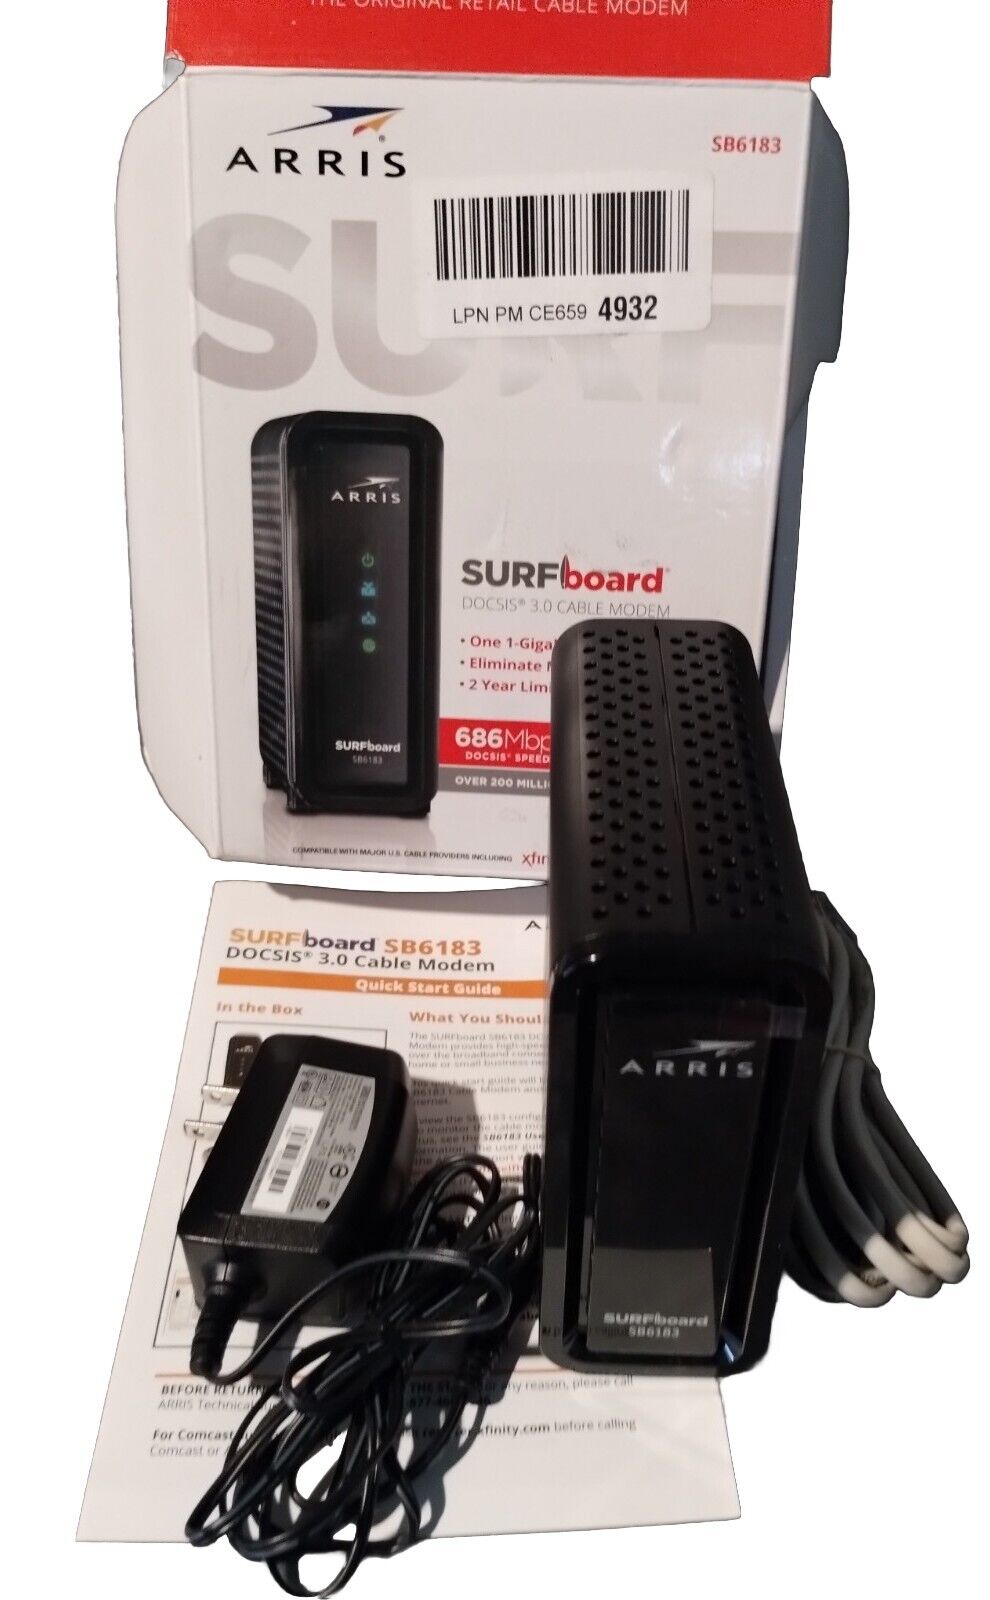 ARRIS SURFboard SBG7600AC2 Cable Modem & Wi-Fi Router - Black